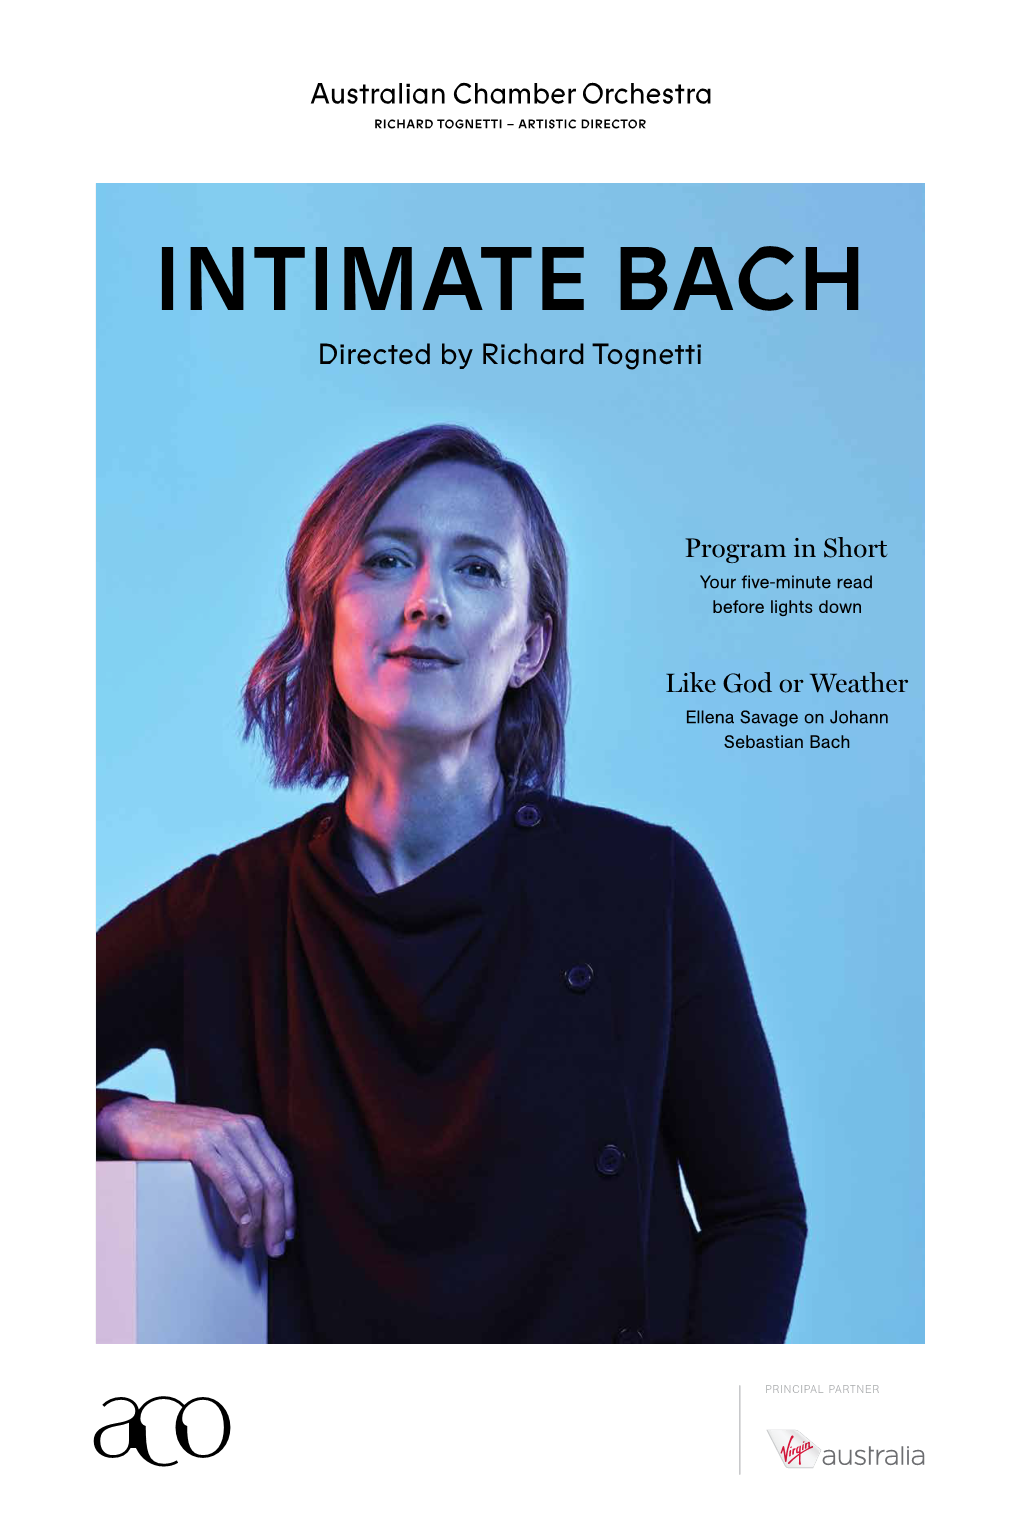 INTIMATE BACH Directed by Richard Tognetti INTIMATE BACH Program in Short Your Five-Minute Read Before Lights Down